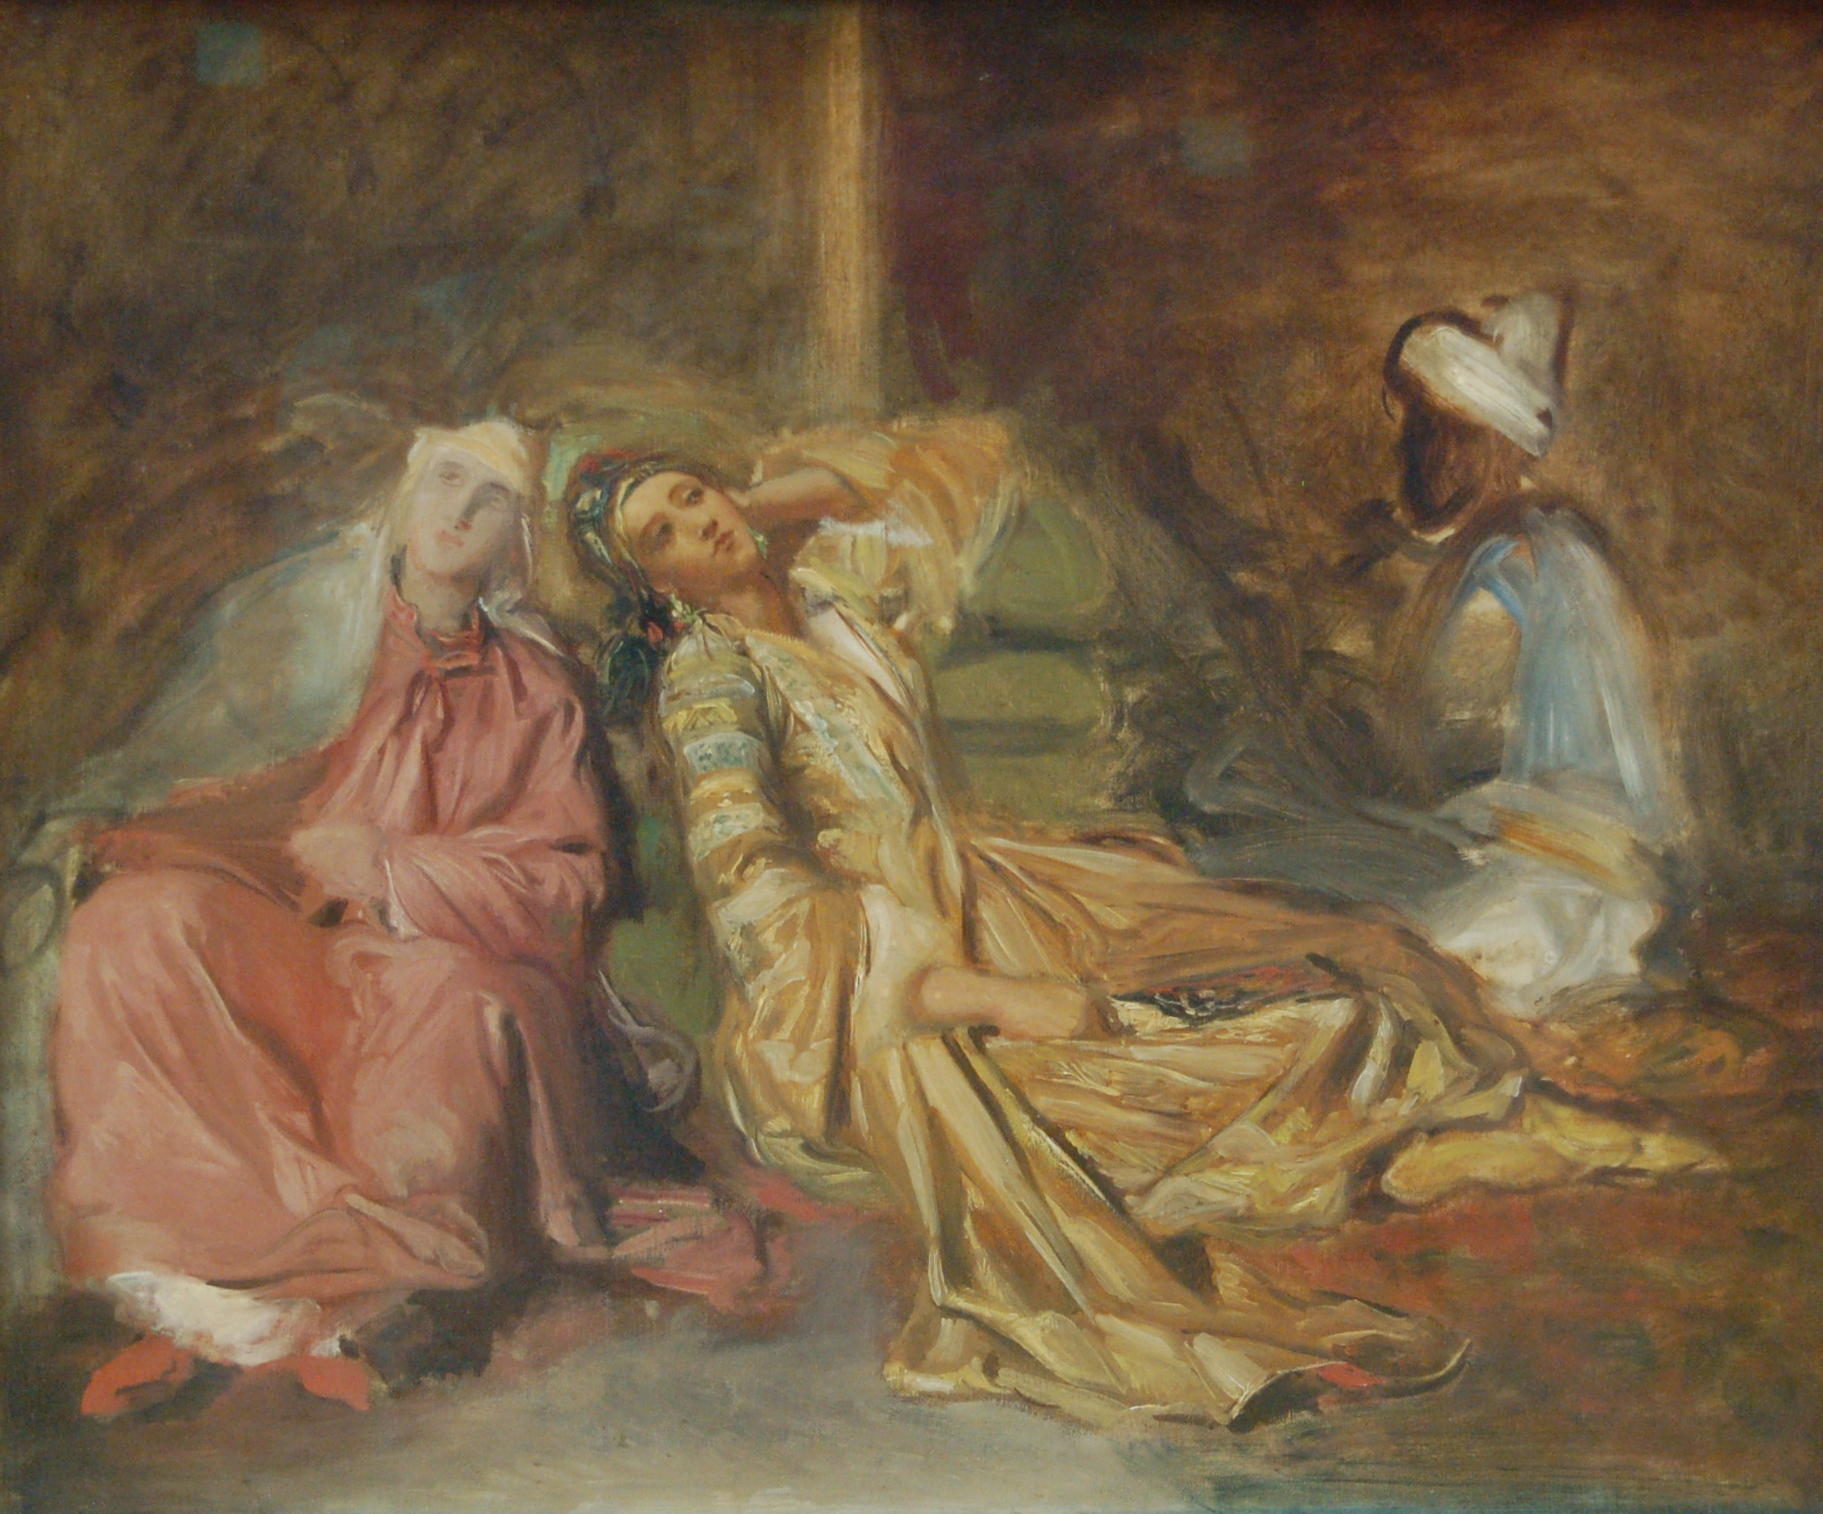 the three women are resting on a bench